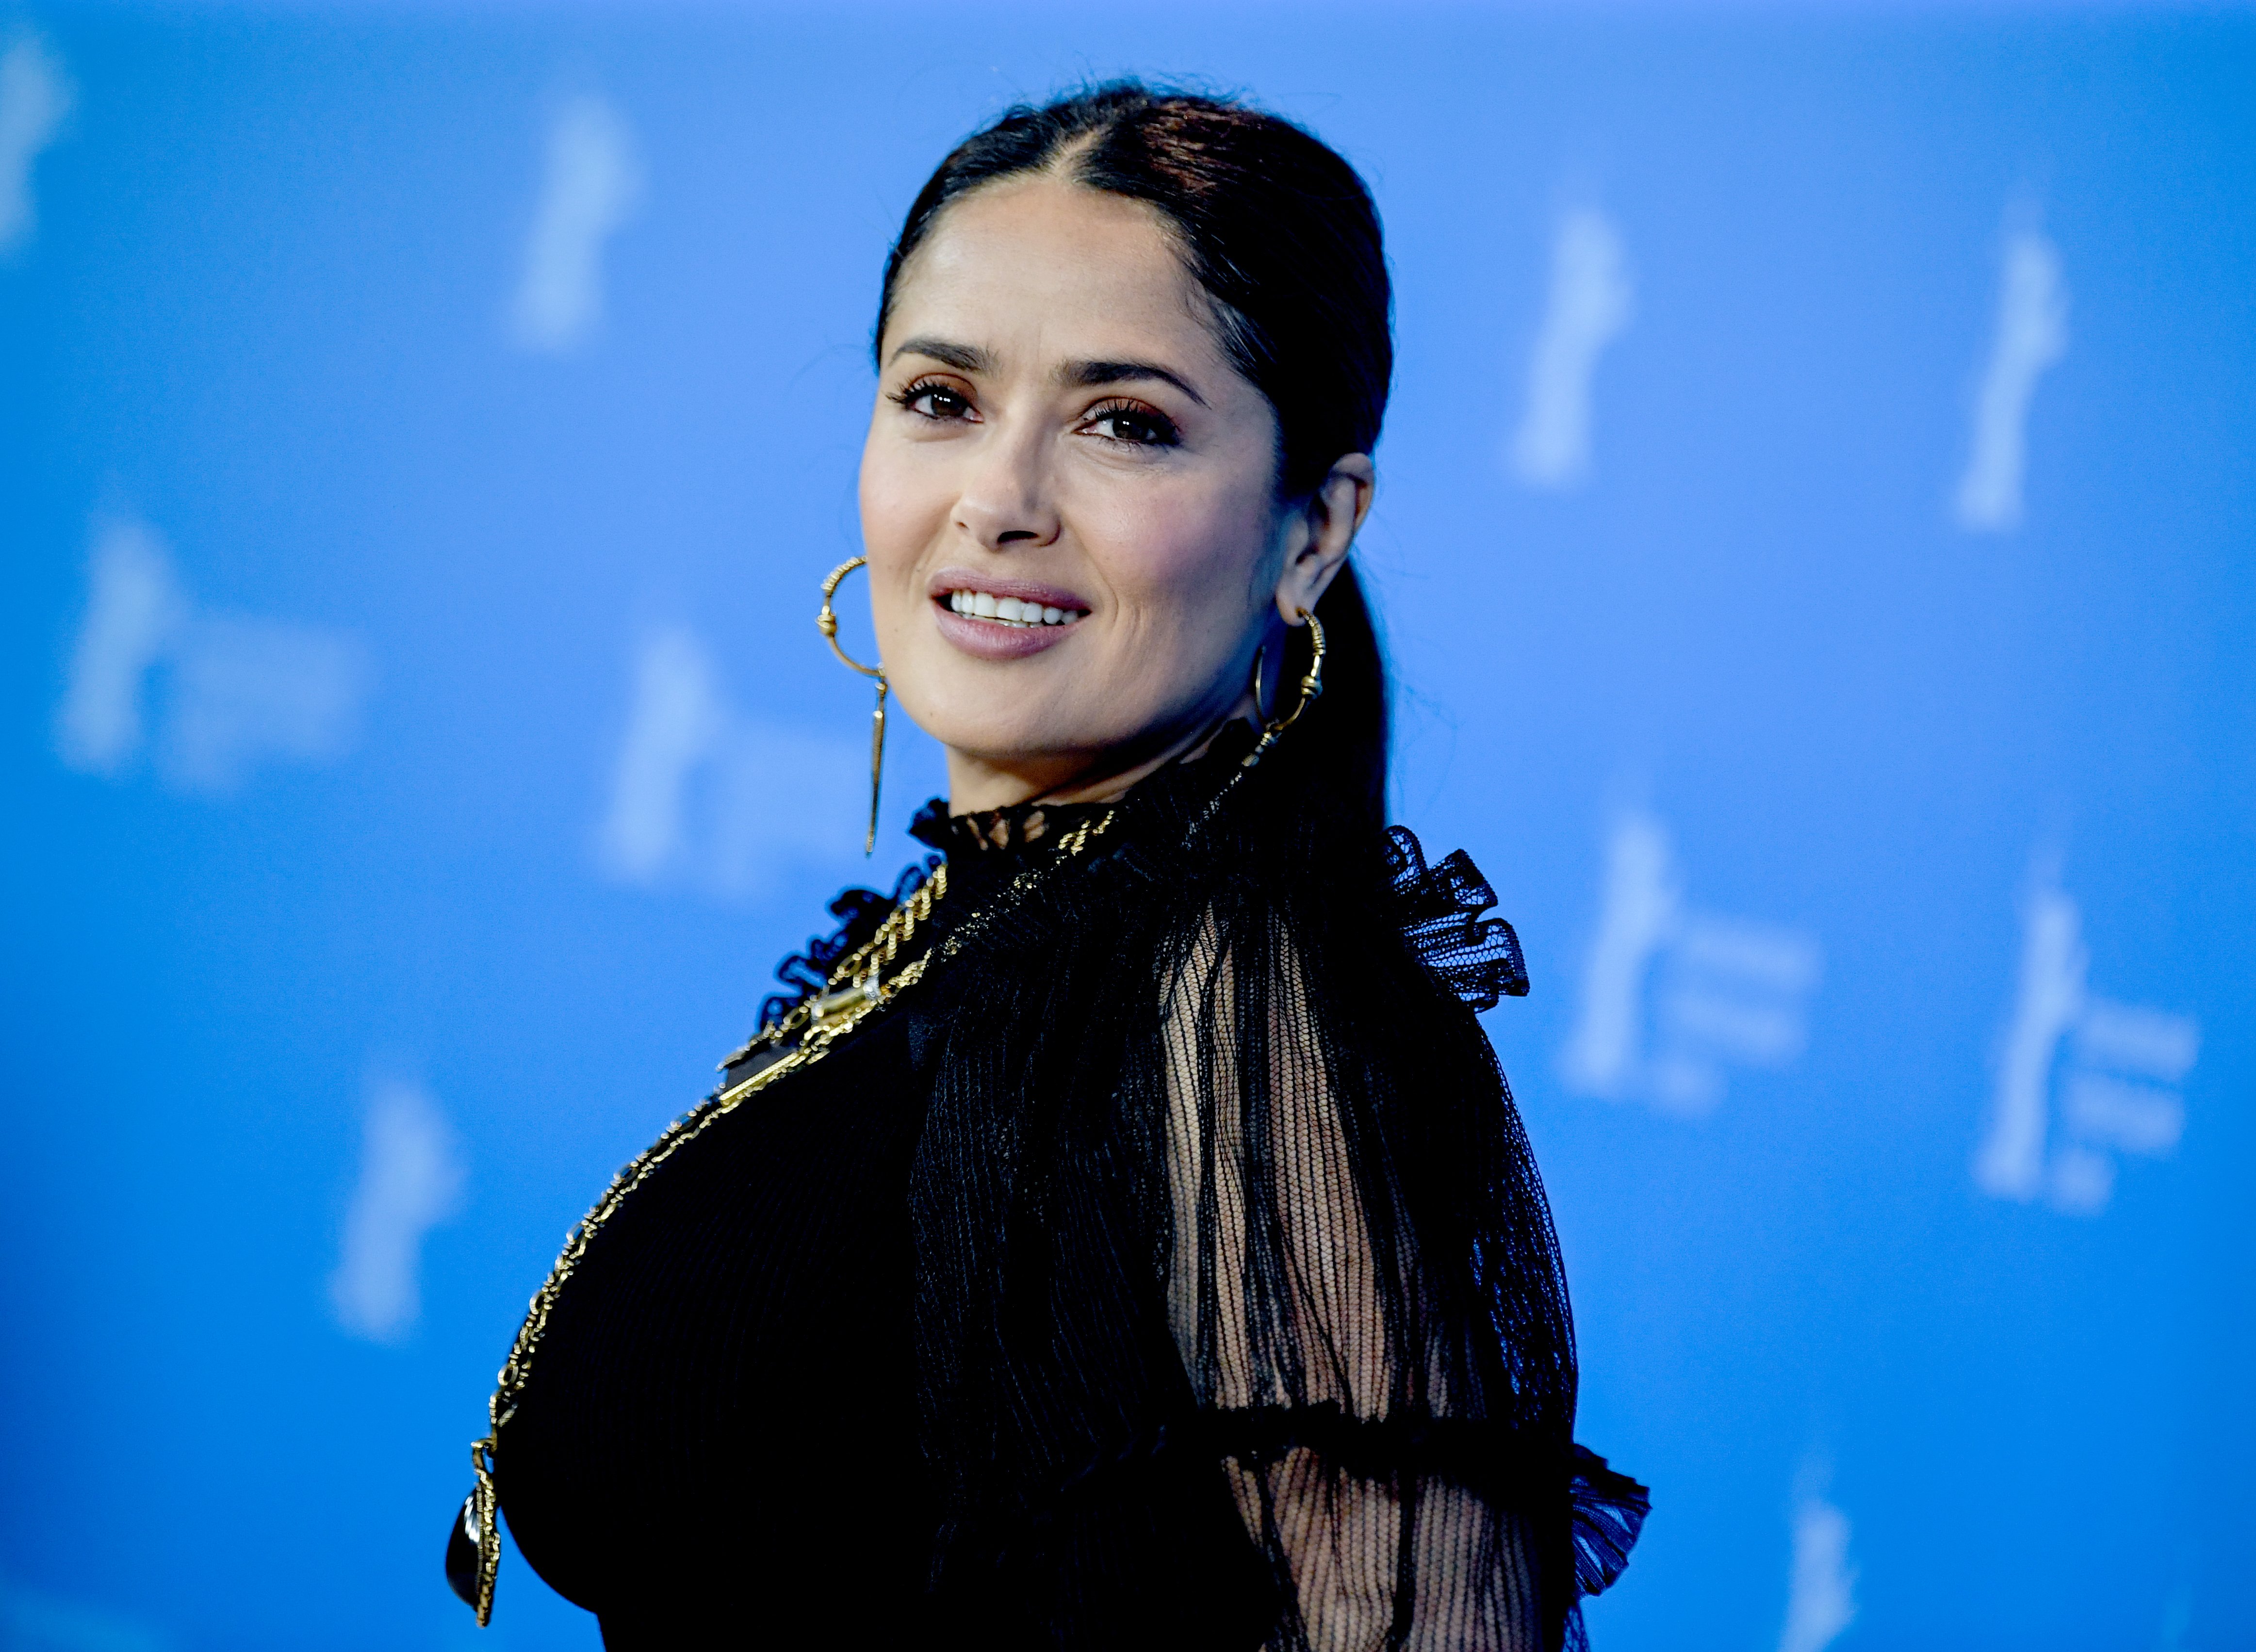 Salma Hayek attends a photocall in Berlin on February 26, 2020. | Source: Getty Images.